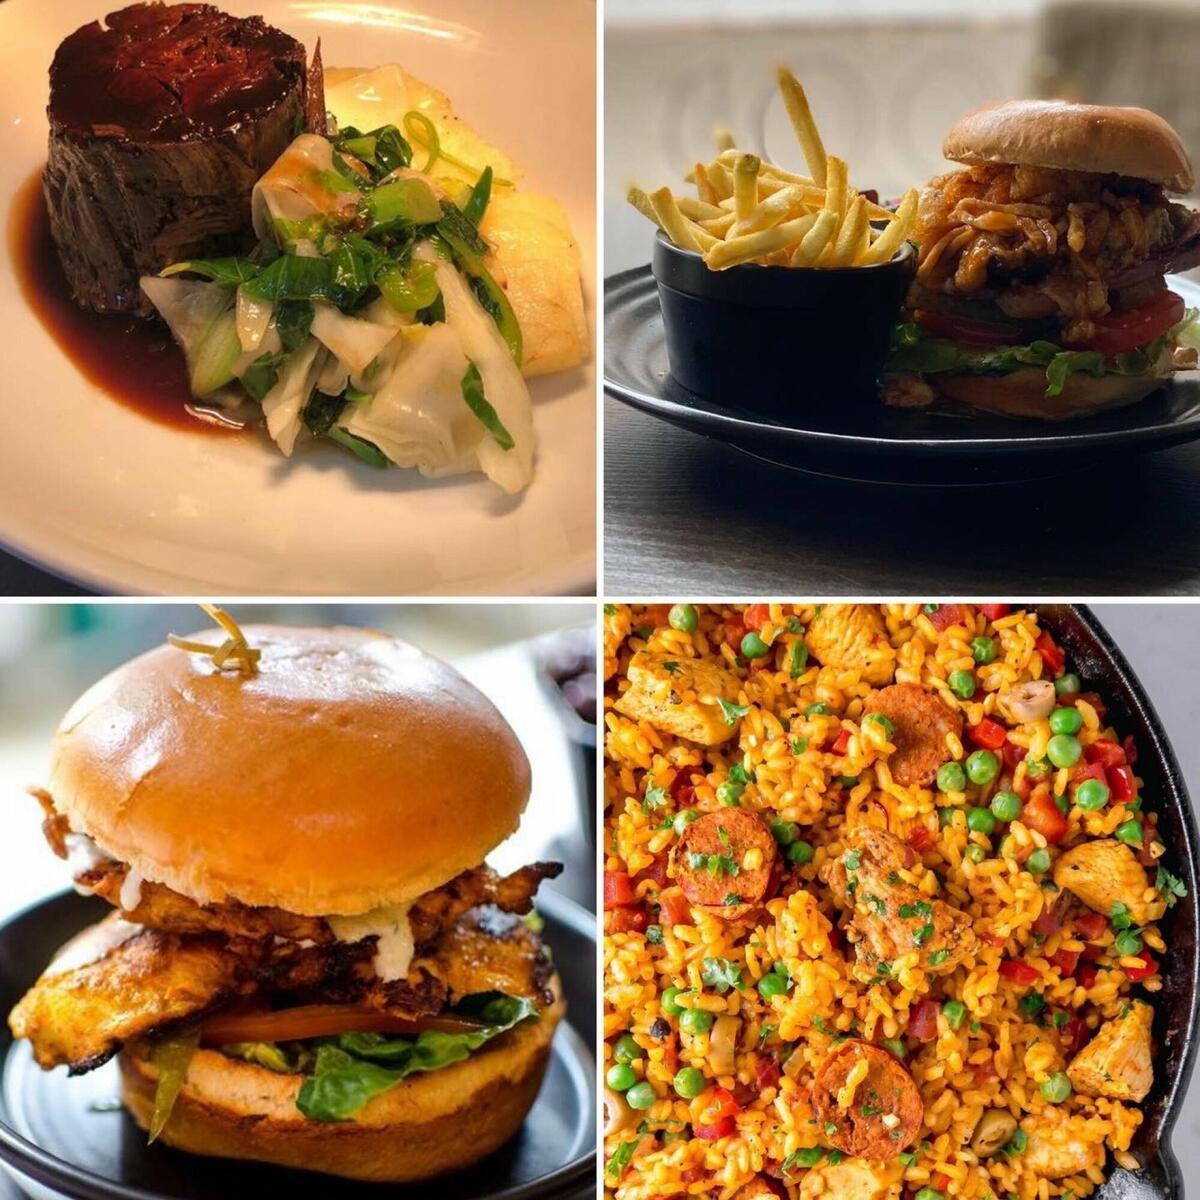 Paella, burgers and more